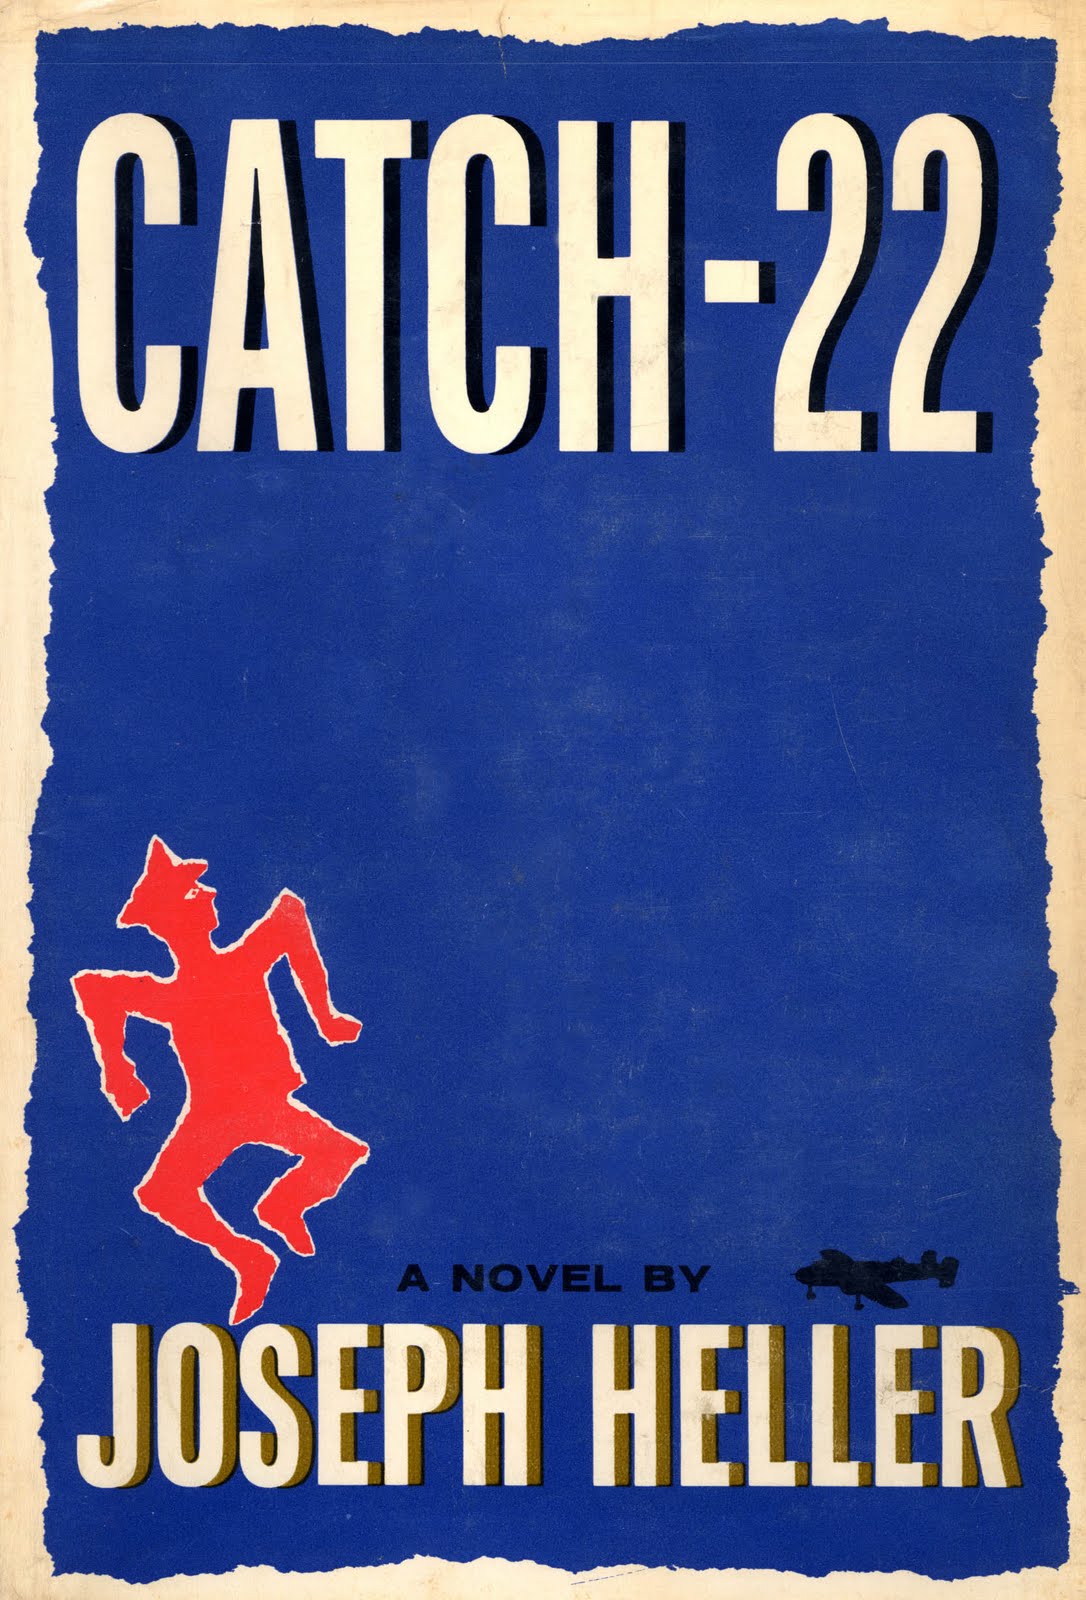 Cover for Catch-22 by Joseph Heller